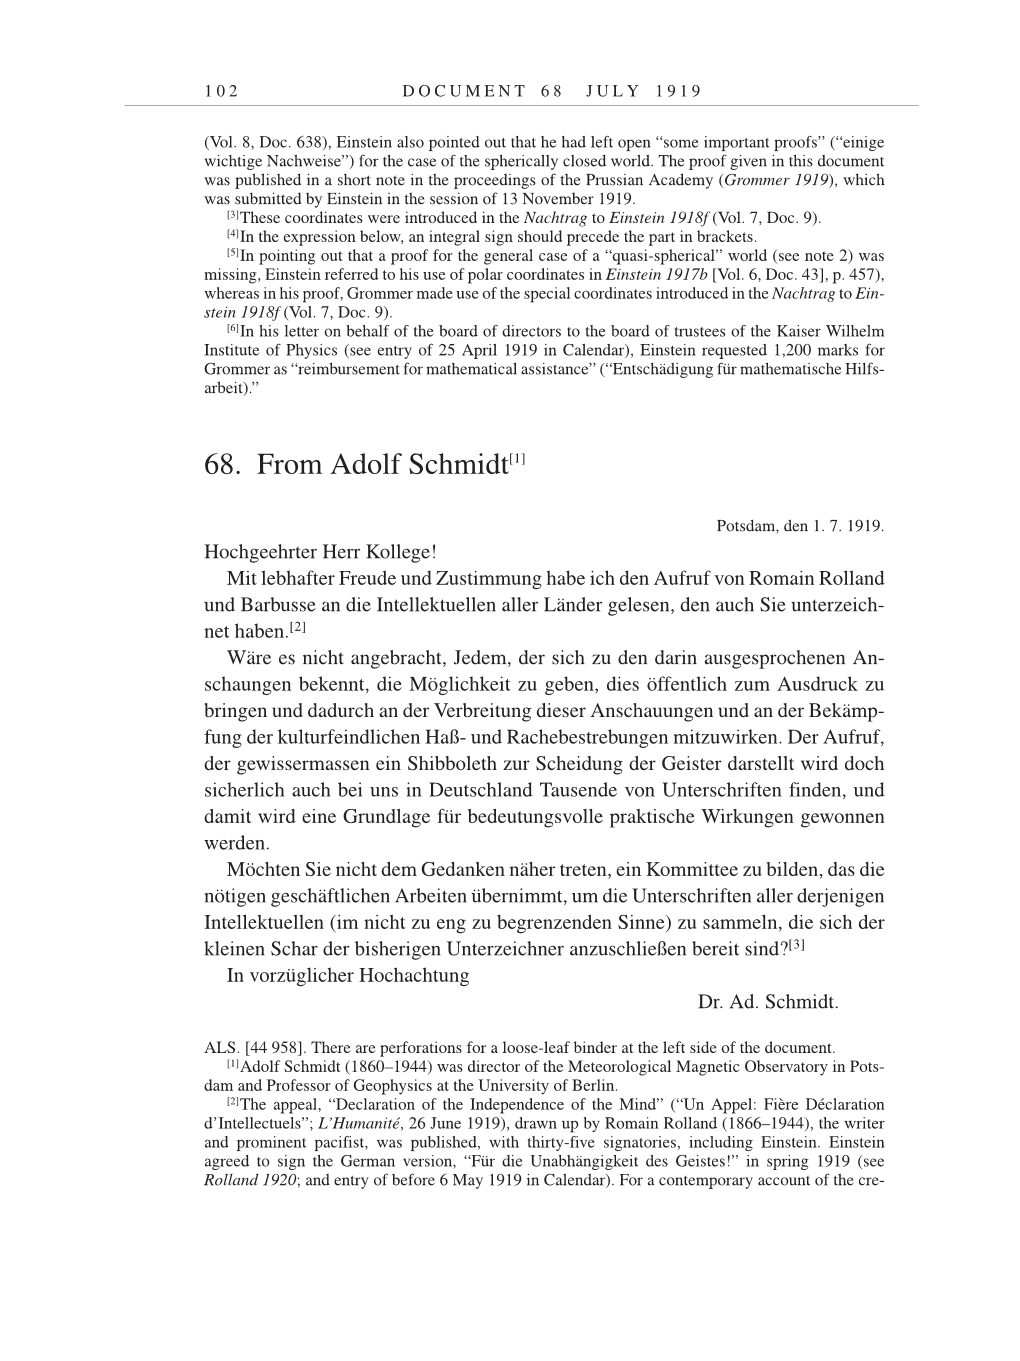 Volume 9: The Berlin Years: Correspondence January 1919-April 1920 page 102